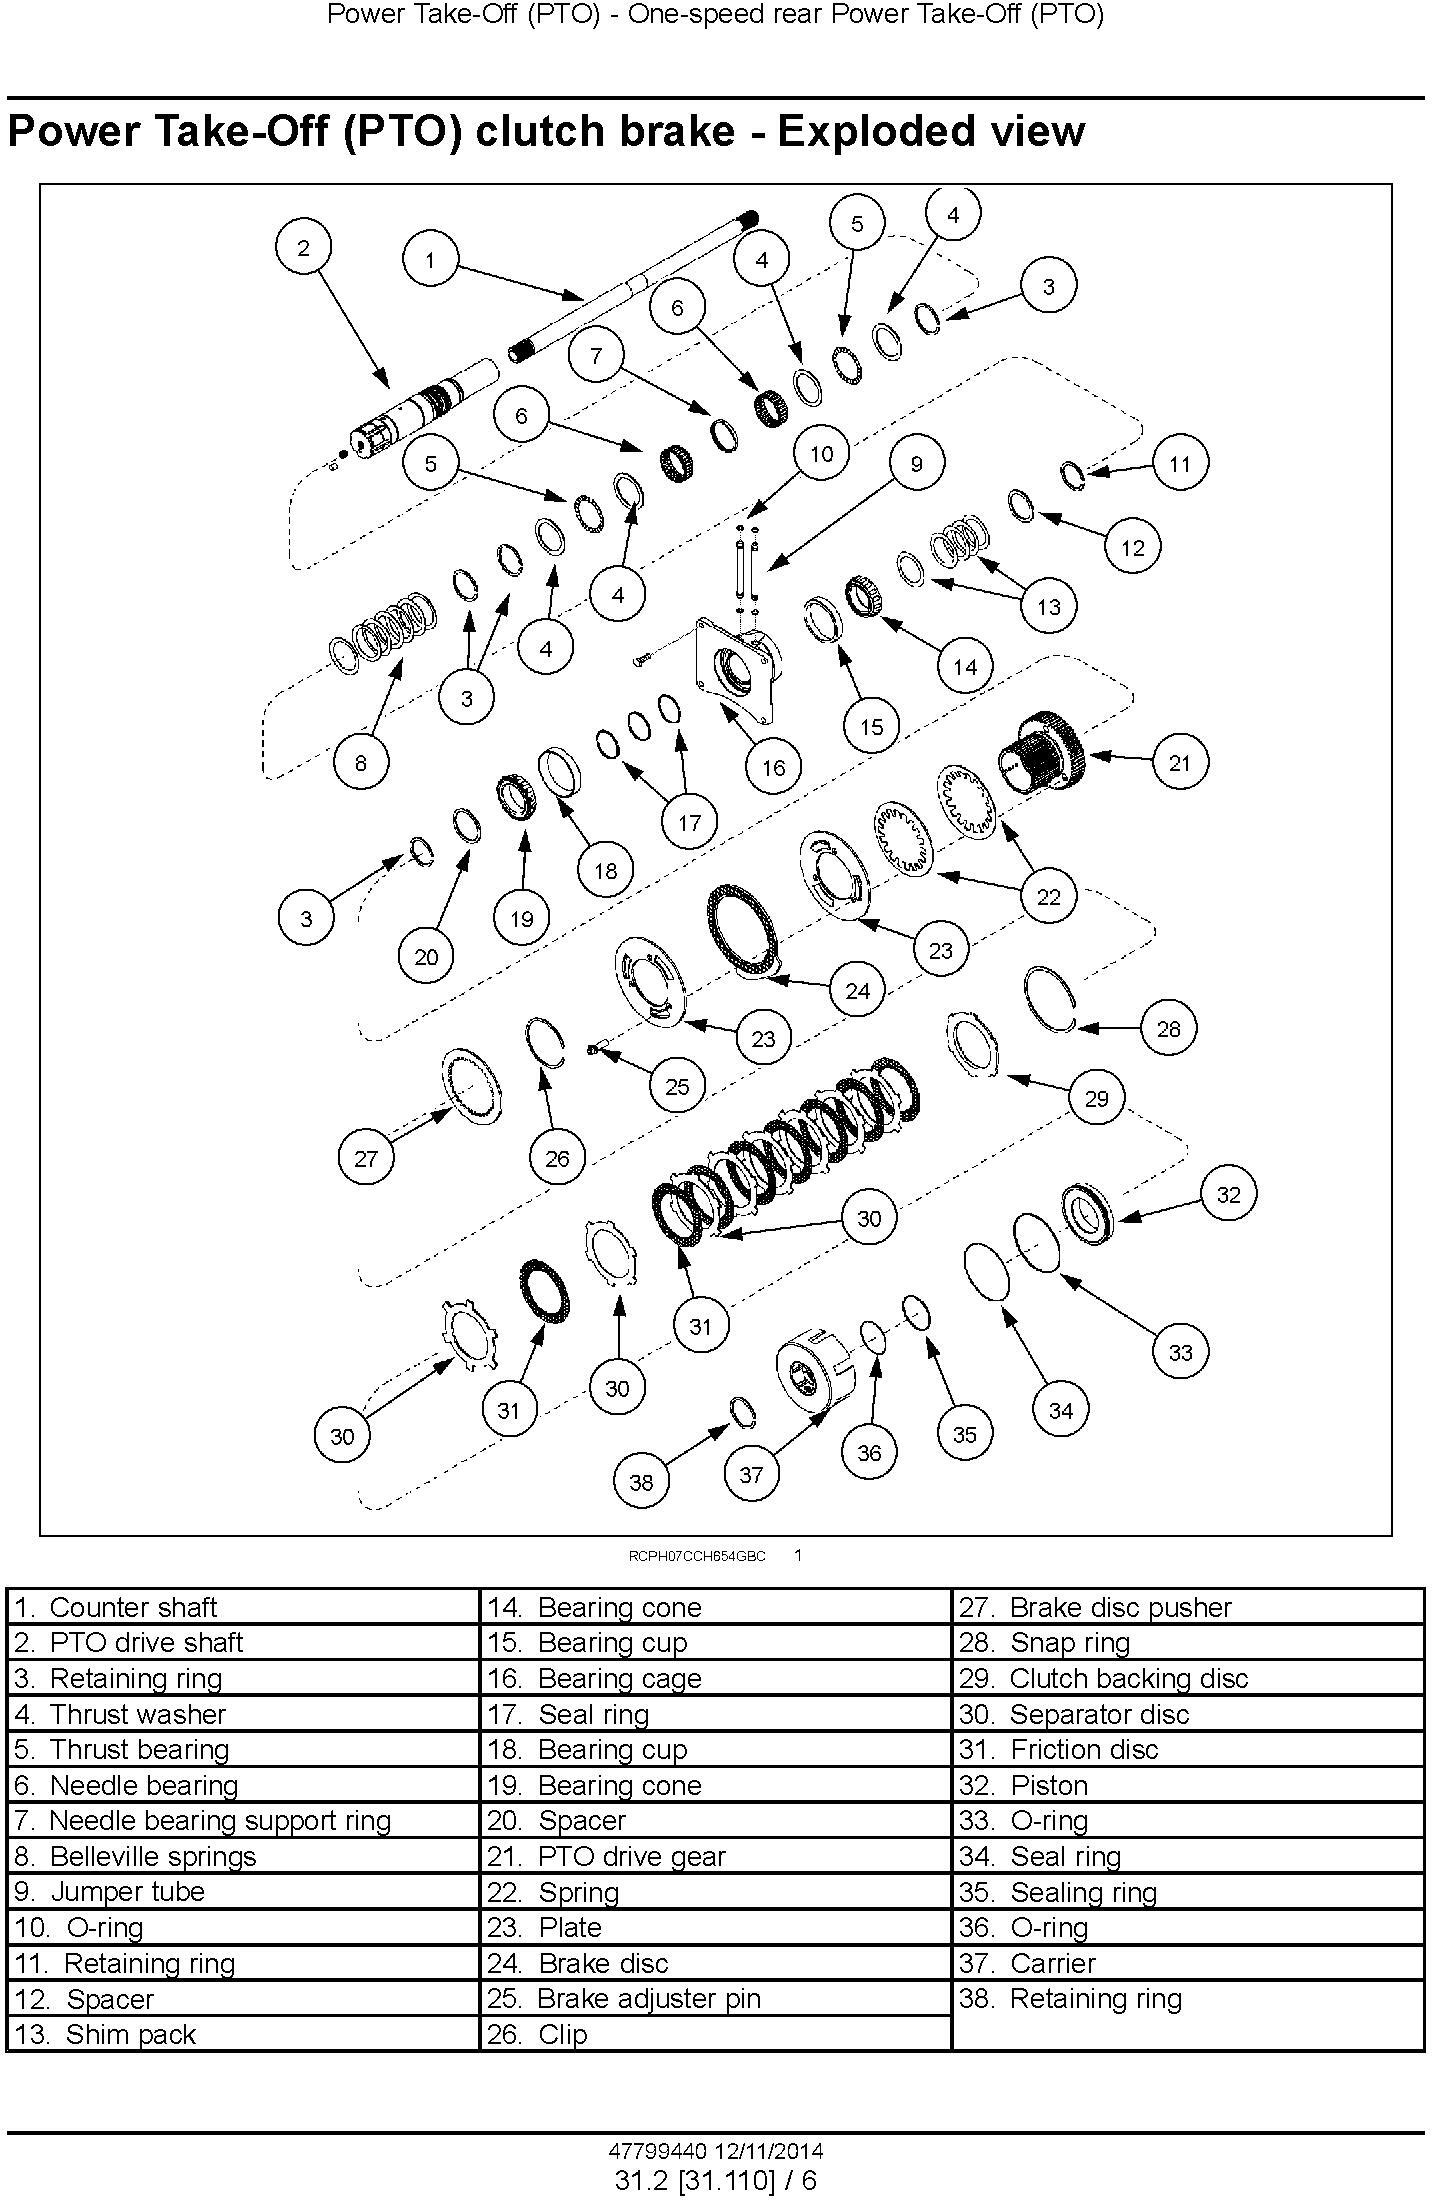 New Holland T8.320, T8.350, T8.380, T8.410 and SmartTrax with PS Transmission Tractor Service Manual - 1